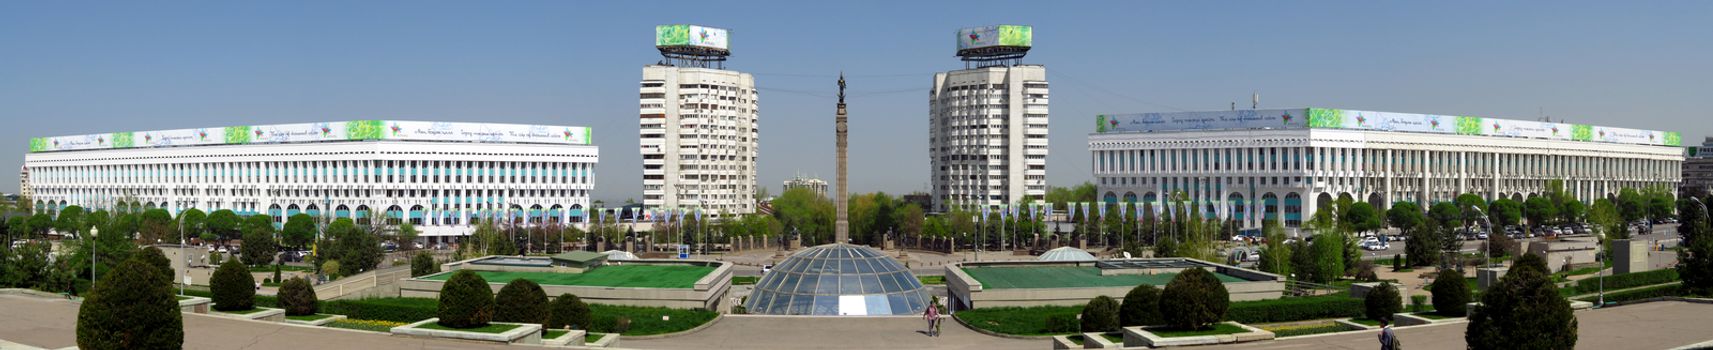 ALMATY, KAZAKHSTAN - APRIL 26, 2017: Panoramic view of the Republic Square and Monument of Independence of Kazakhstan. Monument was inaugurated on Republic Square December 16, 1996.

Almaty, Kazakhstan - April 26, 2017: Panoramic view of the Republic Square and Monument of Independence of Kazakhstan. Monument was inaugurated on Republic Square December 16, 1996.